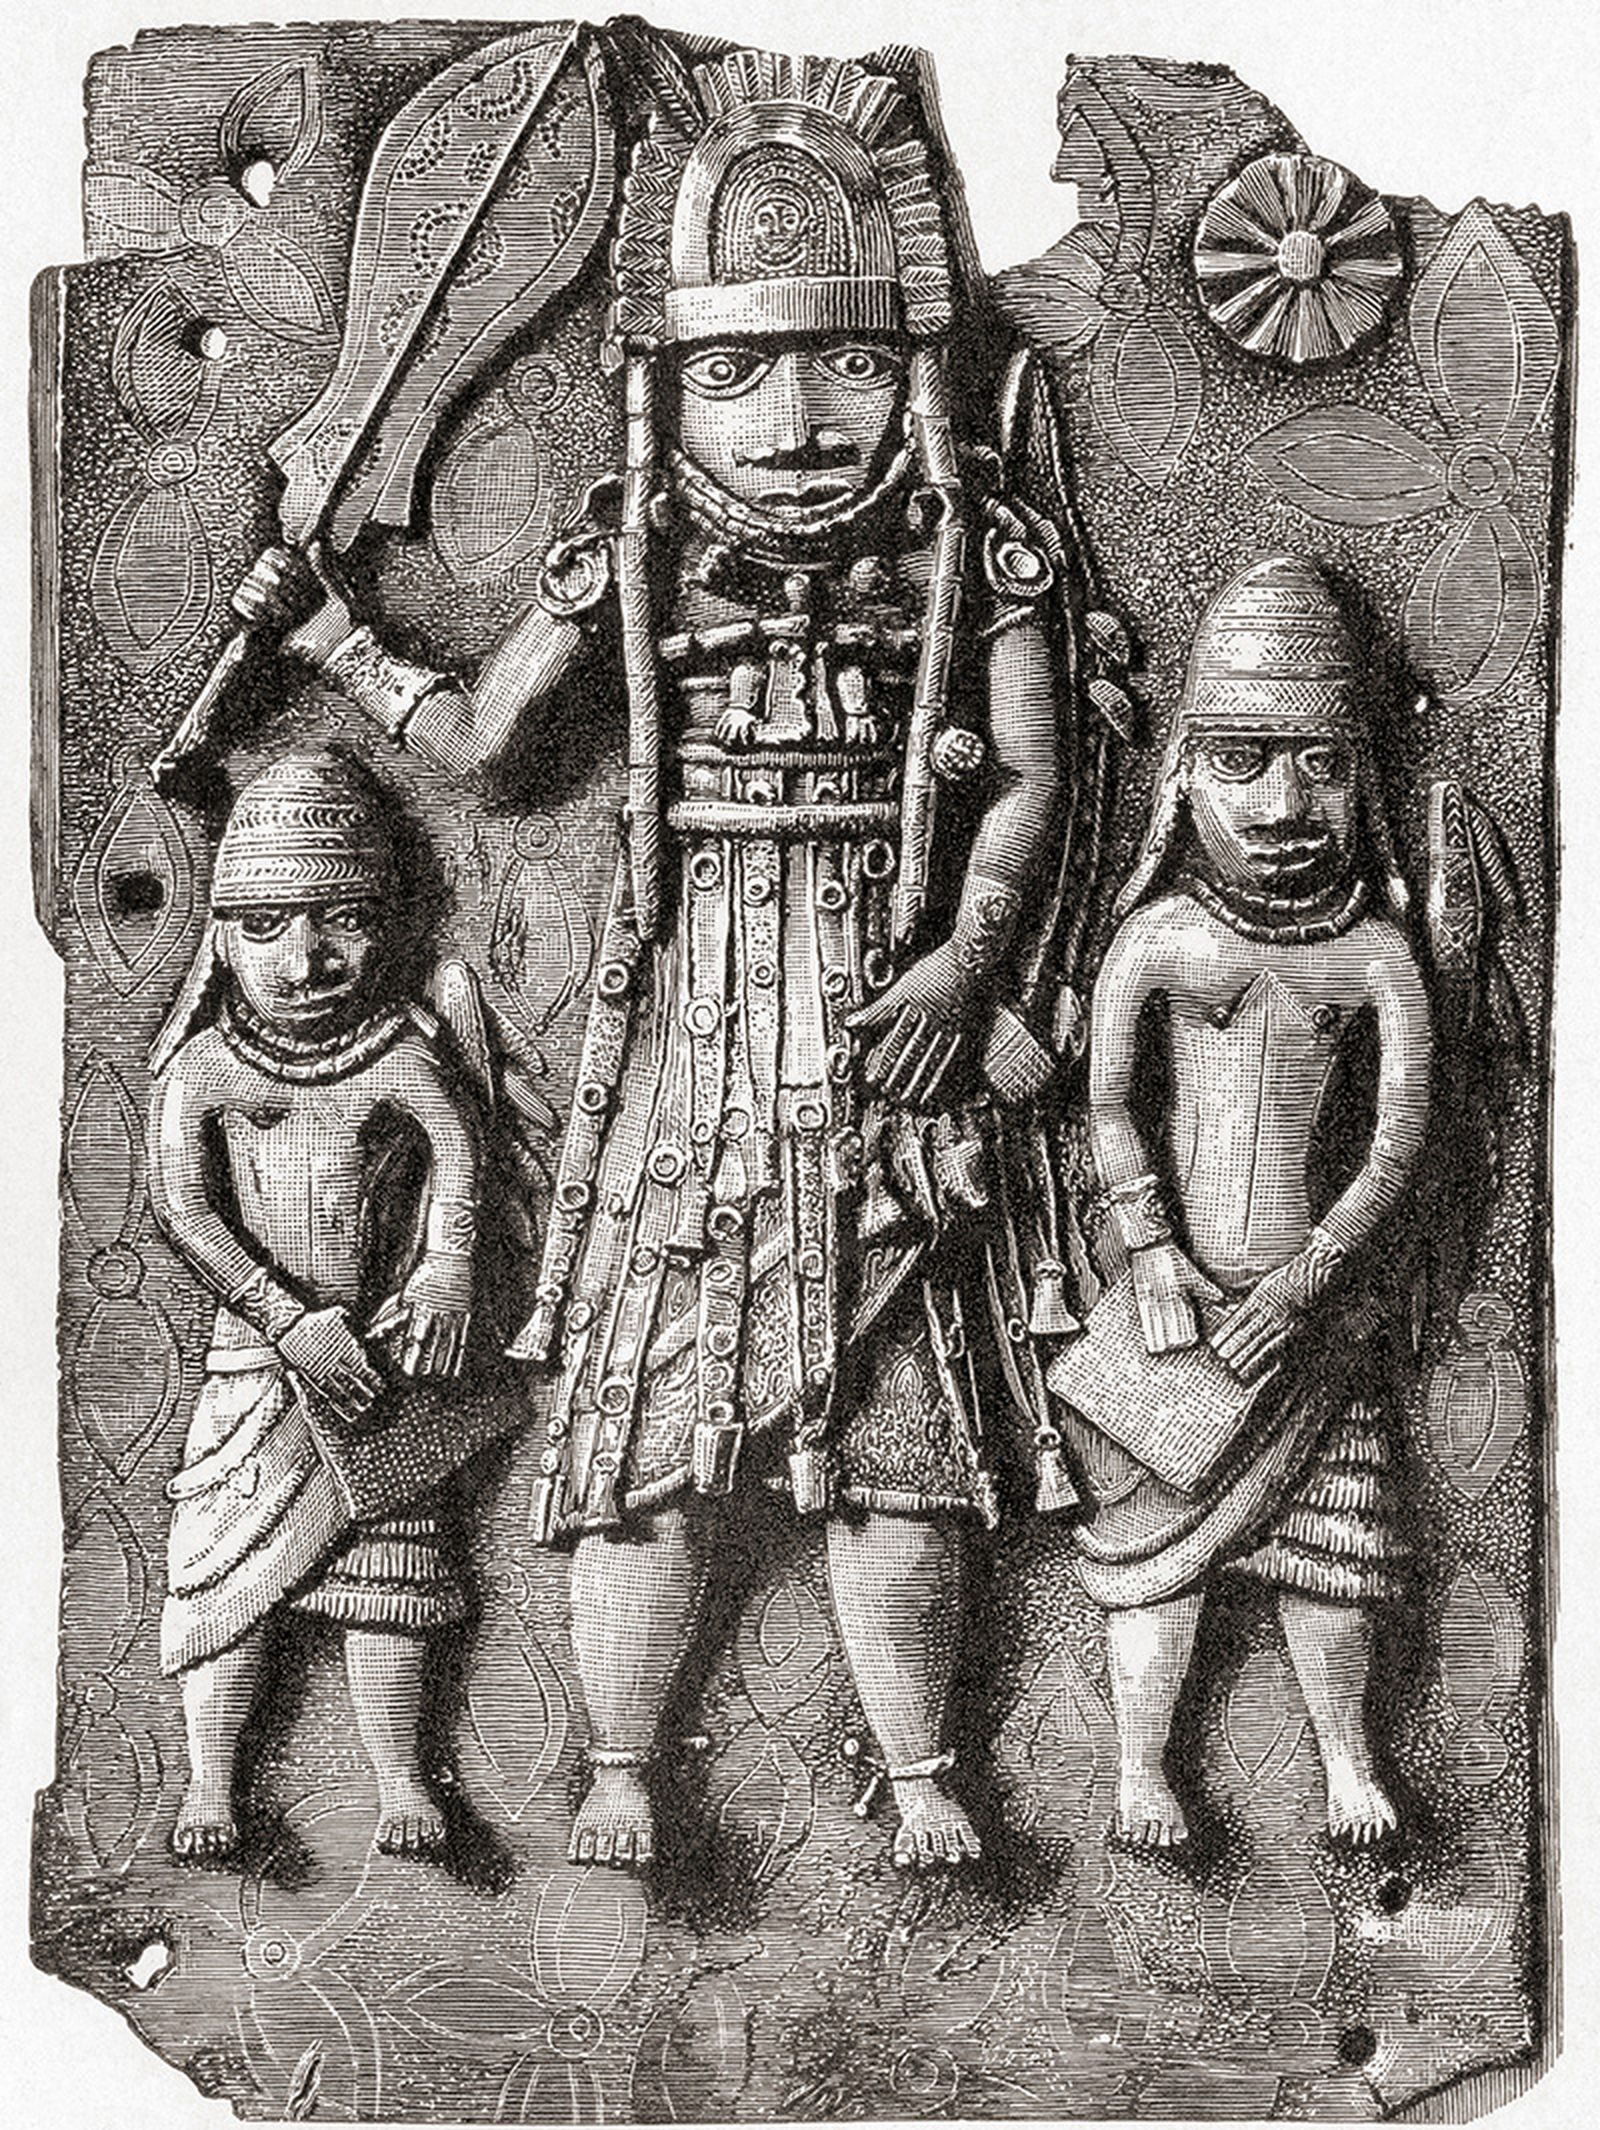 One of the Benin Bronze plaques which originally decorated the royal palace of the Benin Kingdom in modern-day Nigeria. From Meyers Lexicon, published 1924.